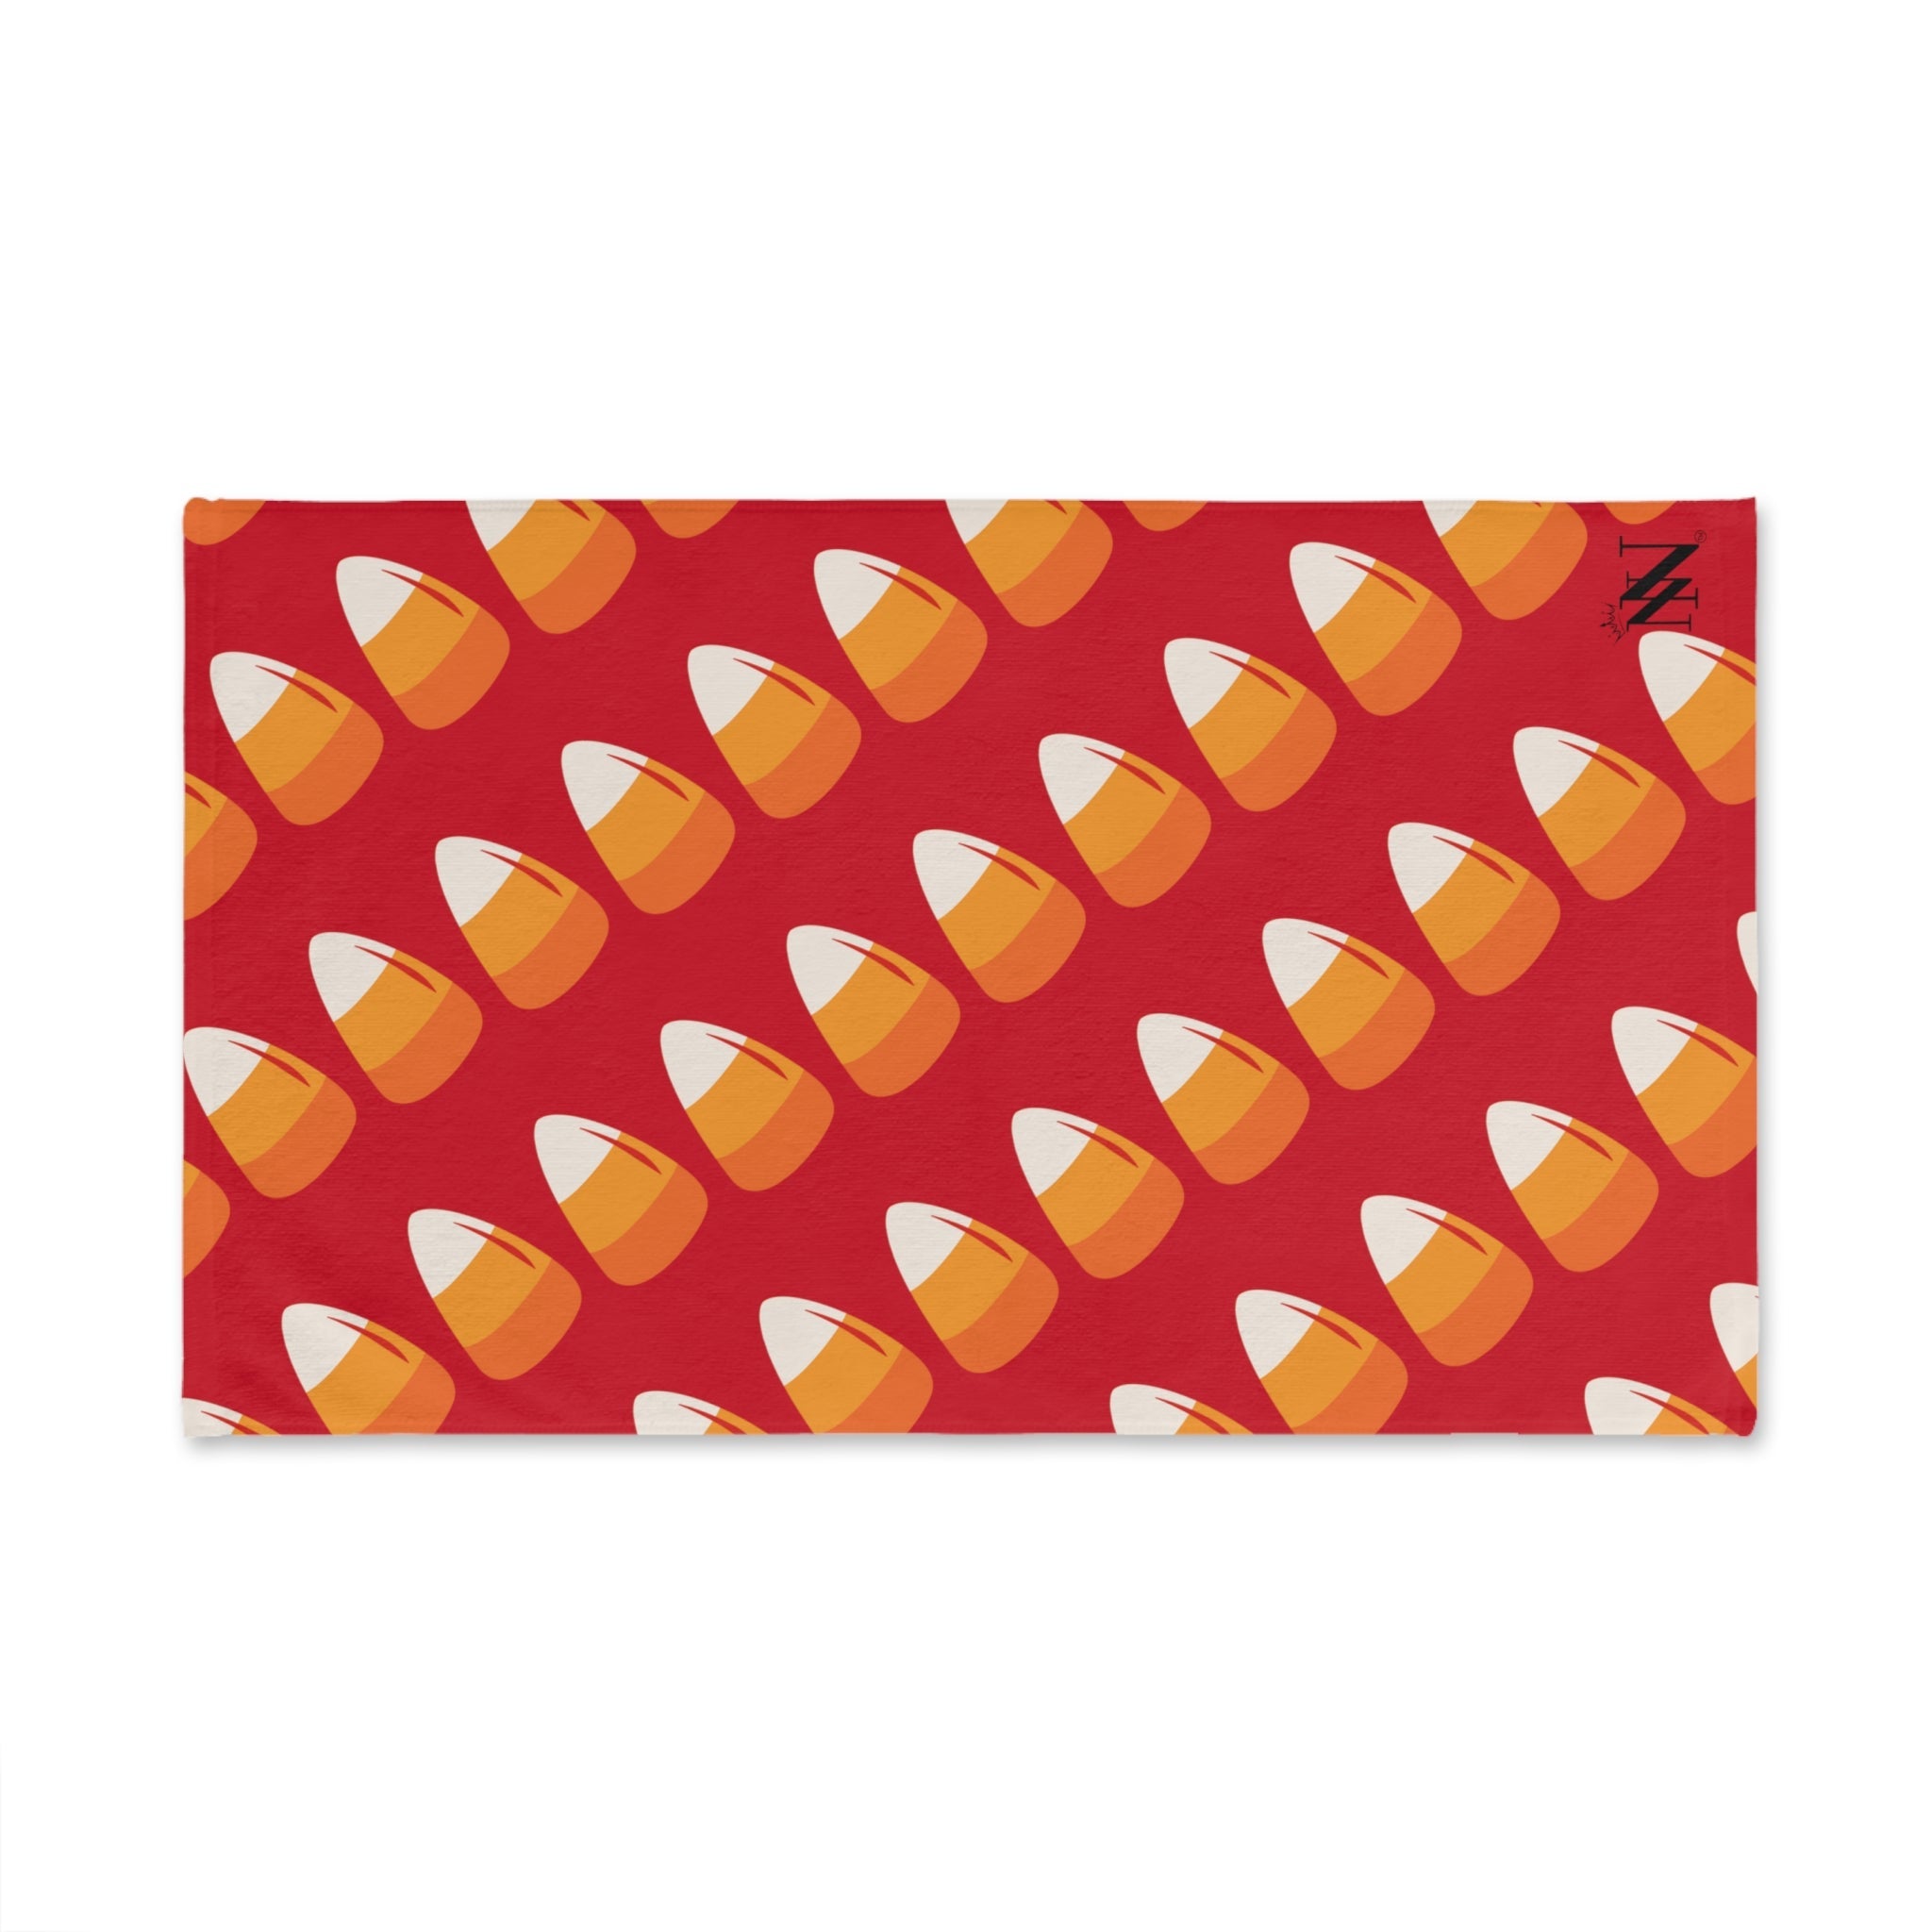 Candy Corn Red | Sexy Gifts for Boyfriend, Funny Towel Romantic Gift for Wedding Couple Fiance First Year 2nd Anniversary Valentines, Party Gag Gifts, Joke Humor Cloth for Husband Men BF NECTAR NAPKINS